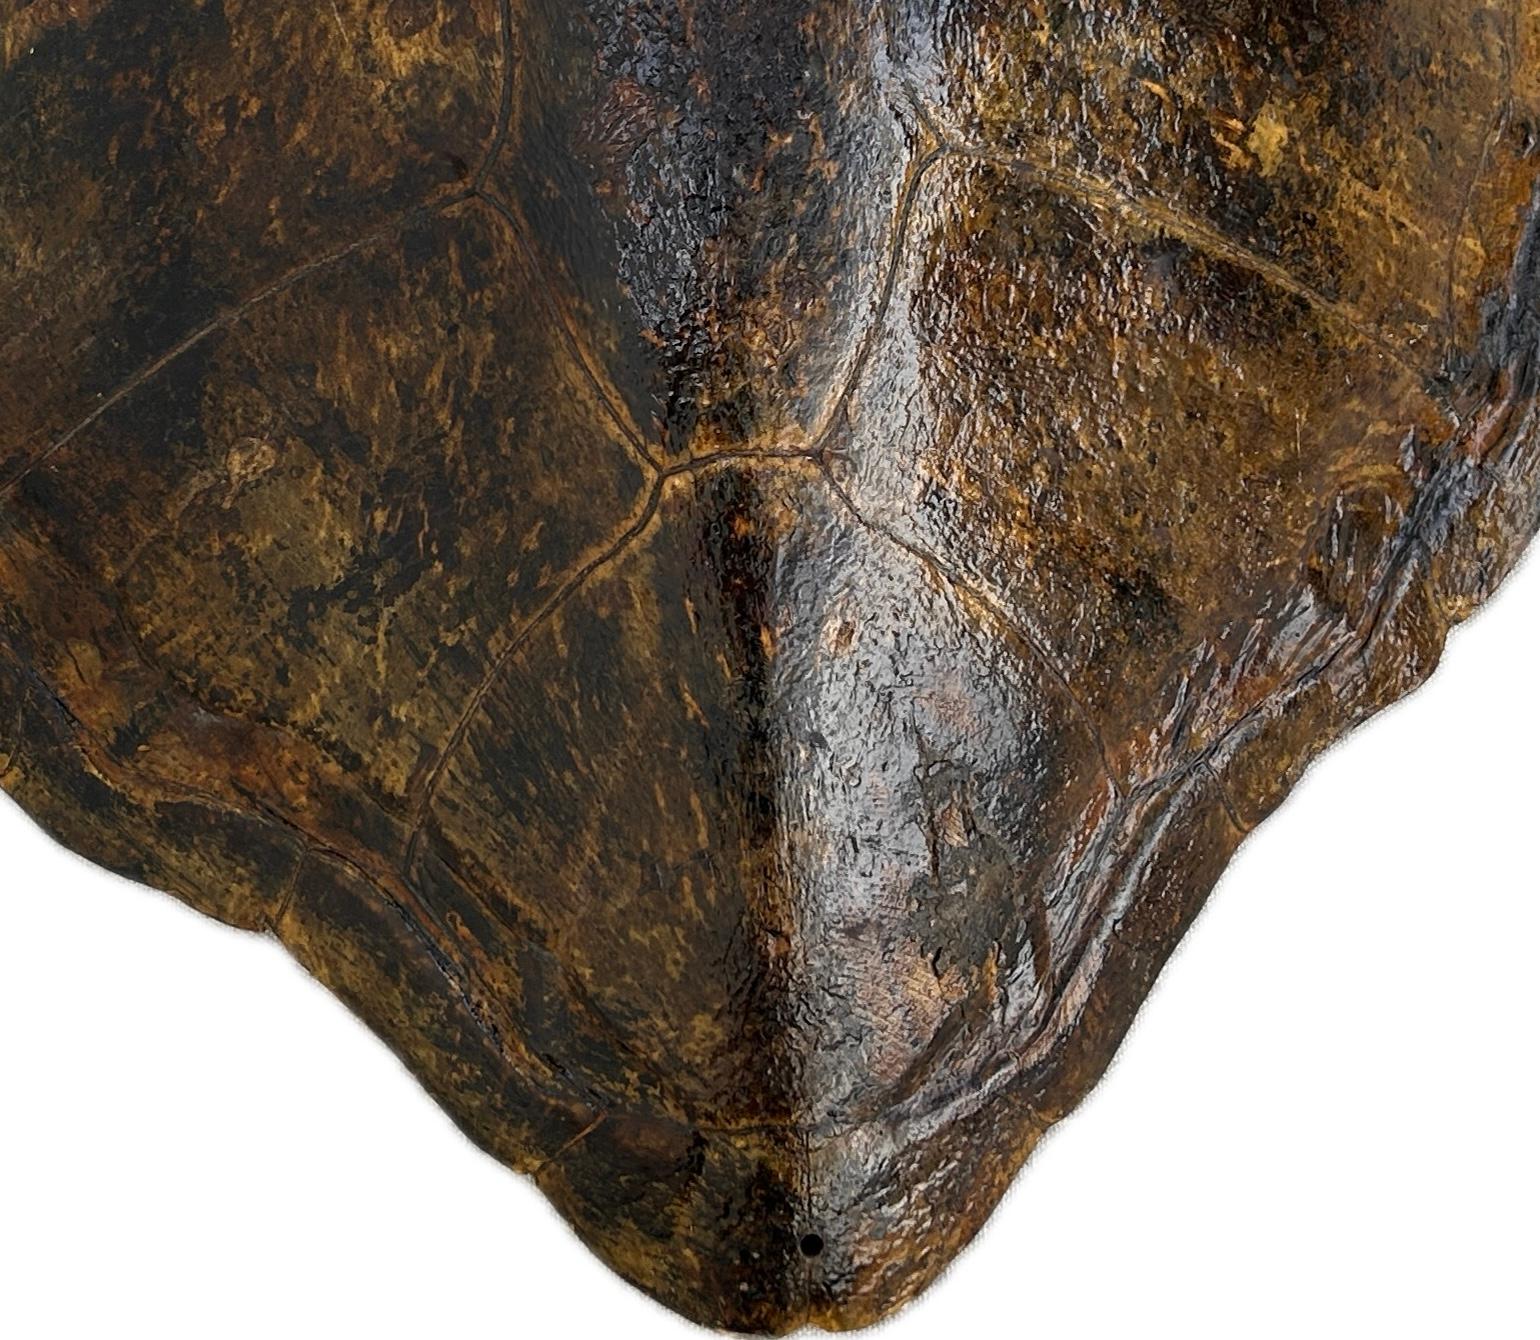 Organic Modern Very Large Turtle Shell Or Carpace